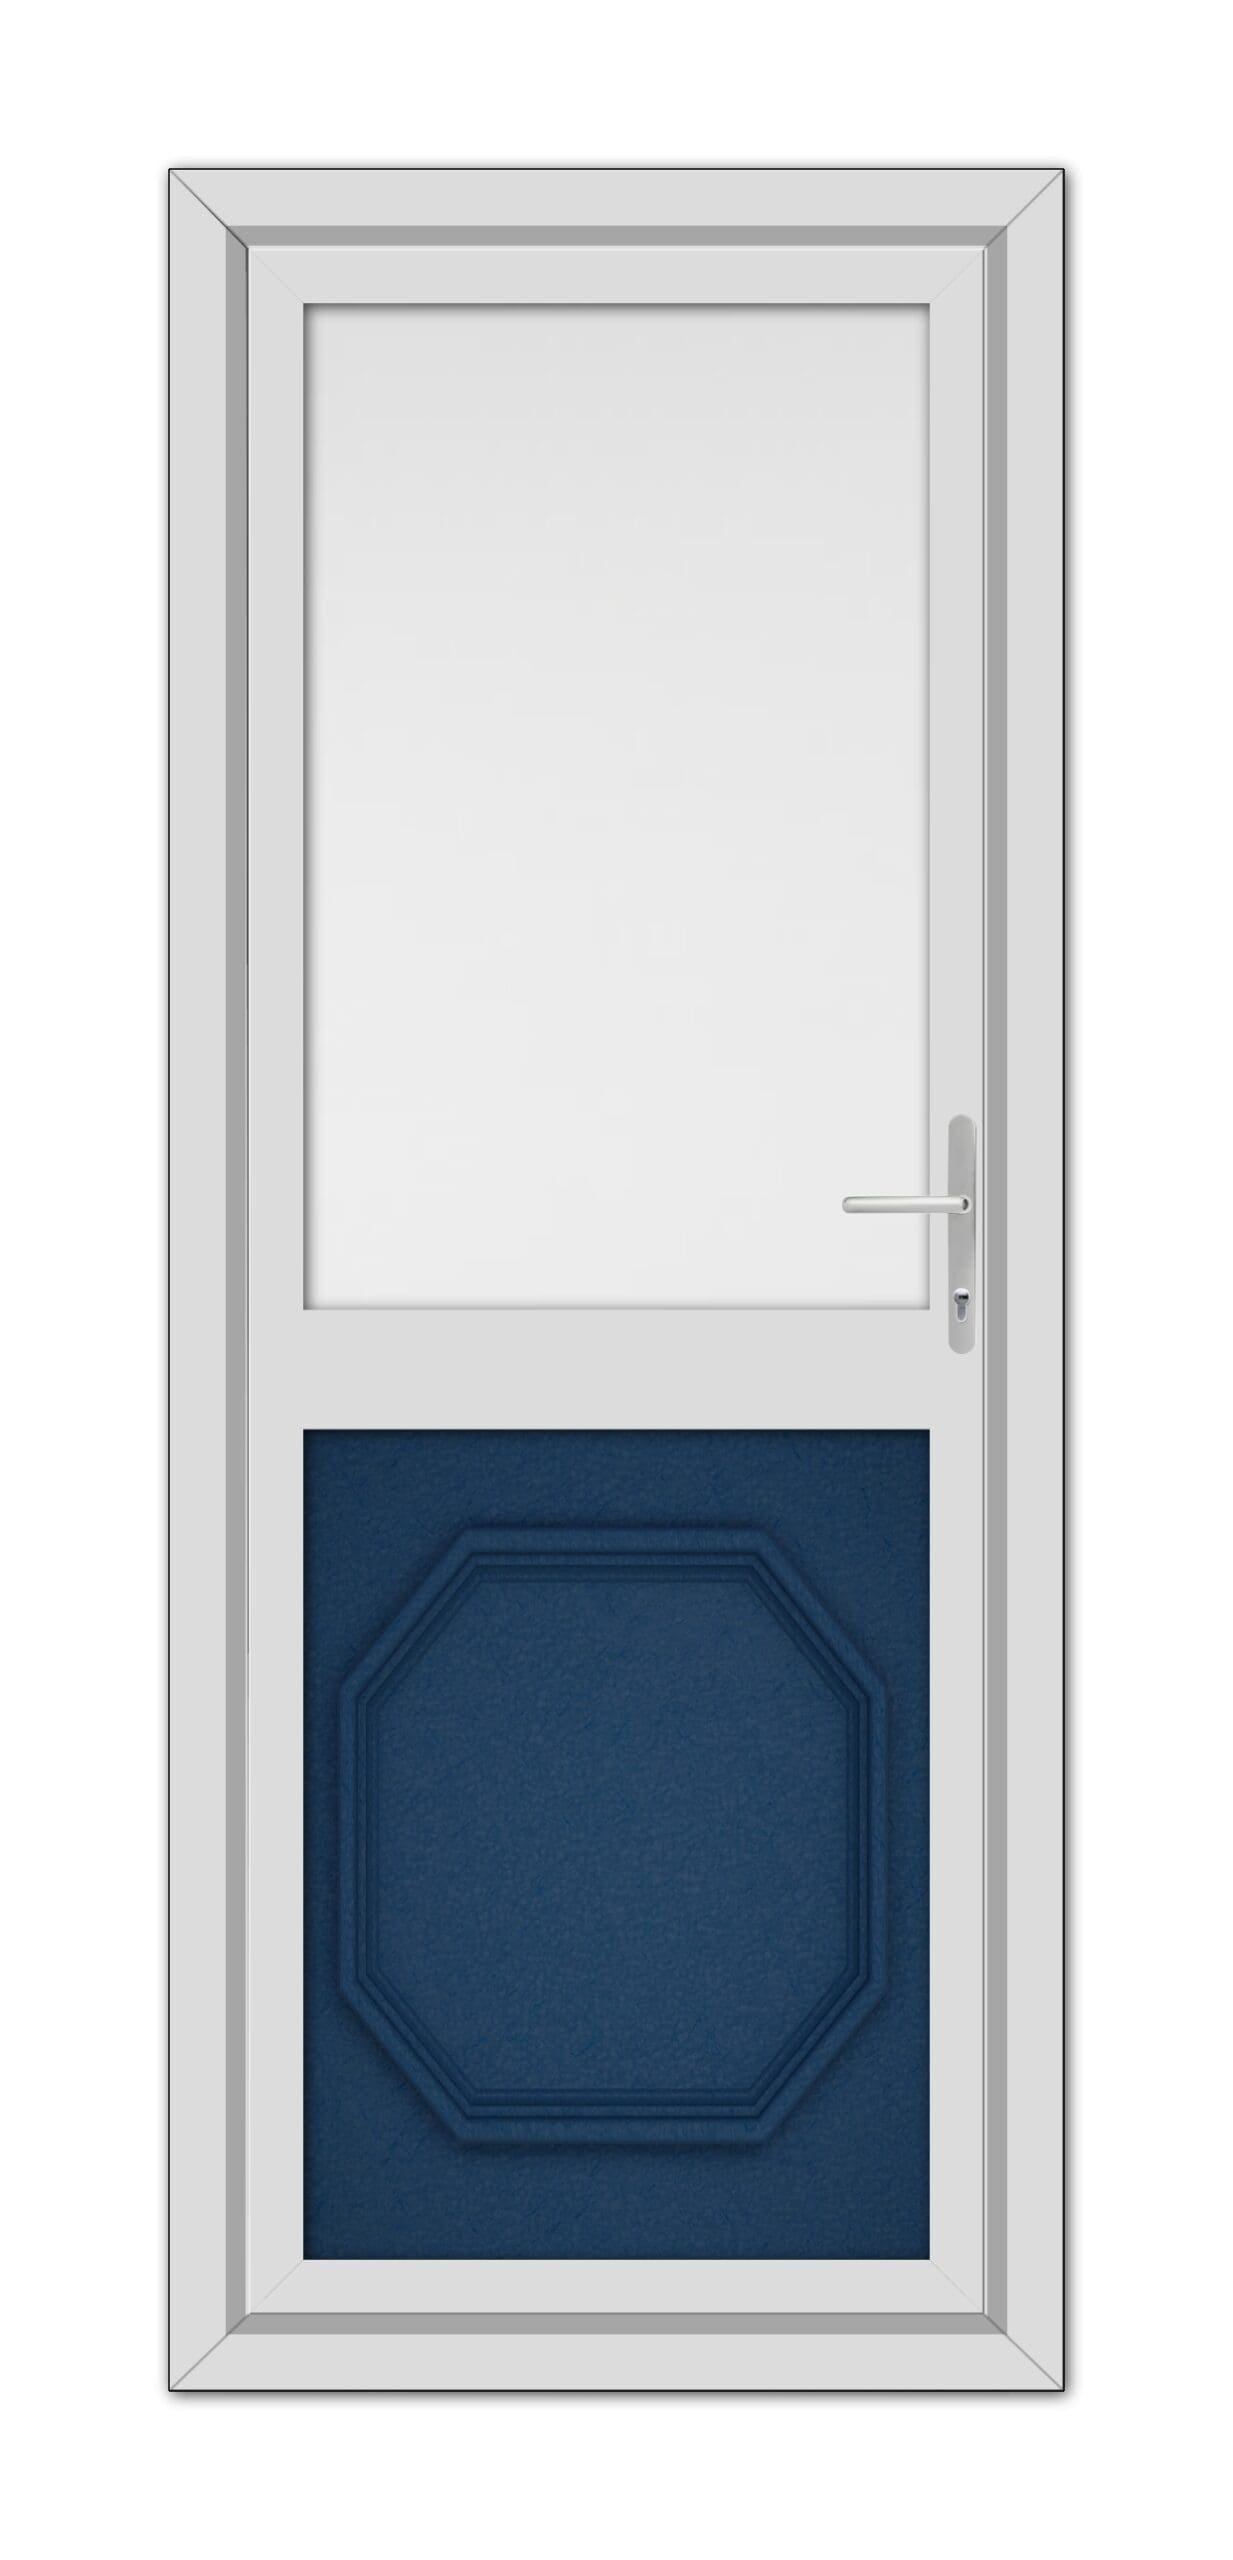 A modern closed Blue Buckingham Half uPVC Back Door in a white frame, featuring a gray handle, a large upper glass panel, and a lower blue panel with an octagonal design.